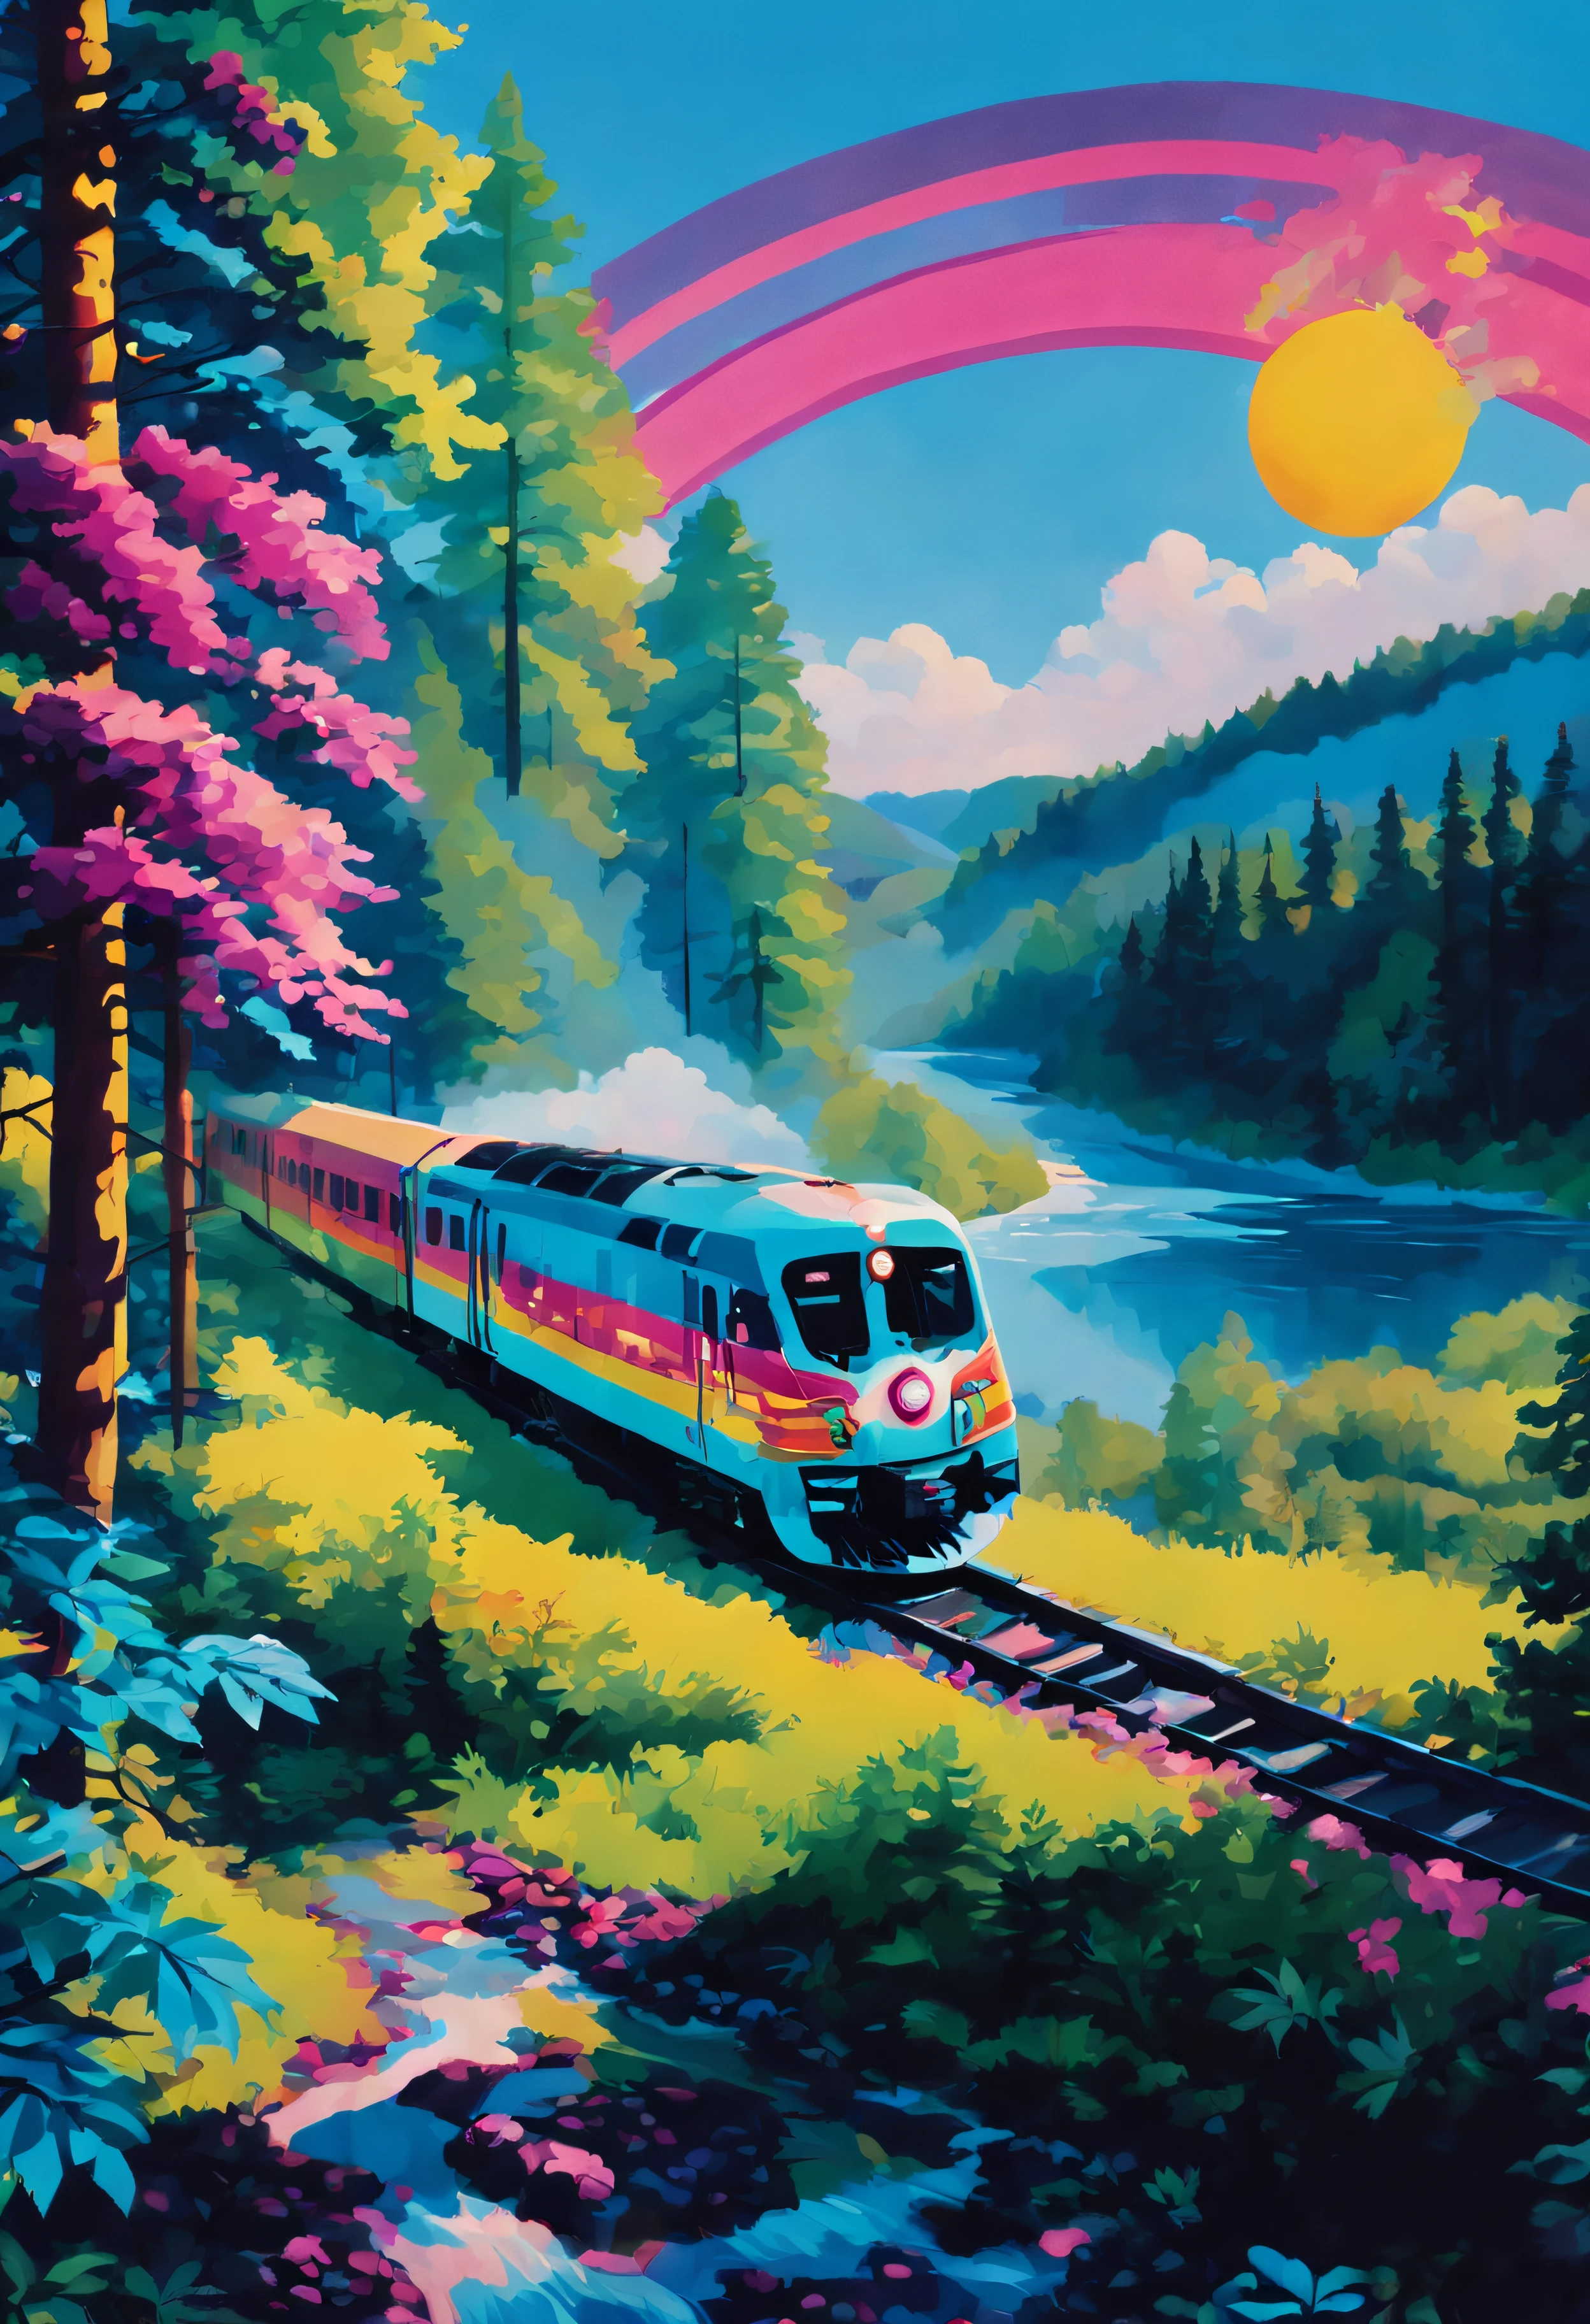 neon style, A train is moving through a forest. The train is surrounded by trees. The sky is blue and the sun is shining. There is a river in the background.